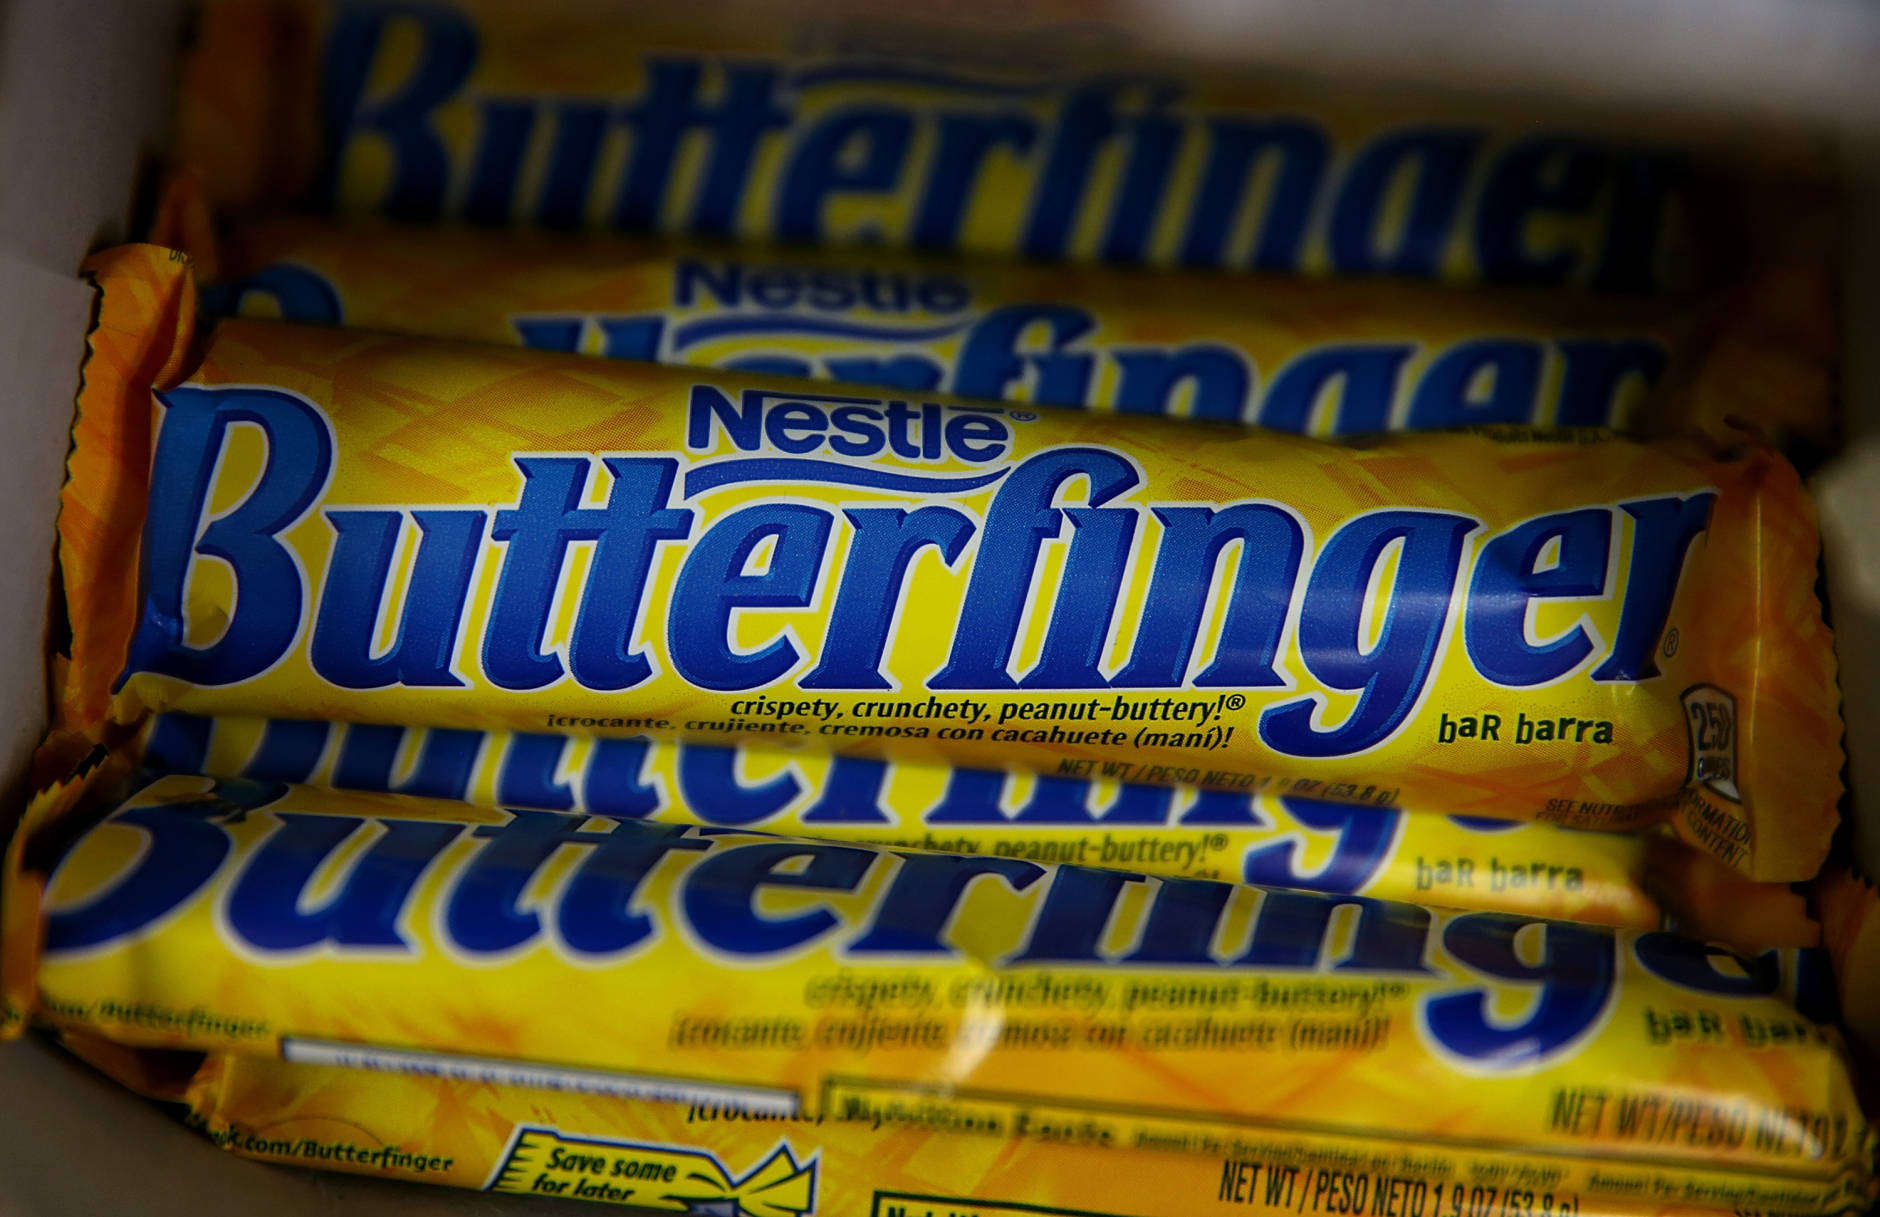 Fun size Nestle Butterfinger bars ranked No. 5 on Peapod's list of top-selling Halloween candy in the Washington, D.C. region. The full-size bar is shown here. (Photo by Justin Sullivan/Getty Images)